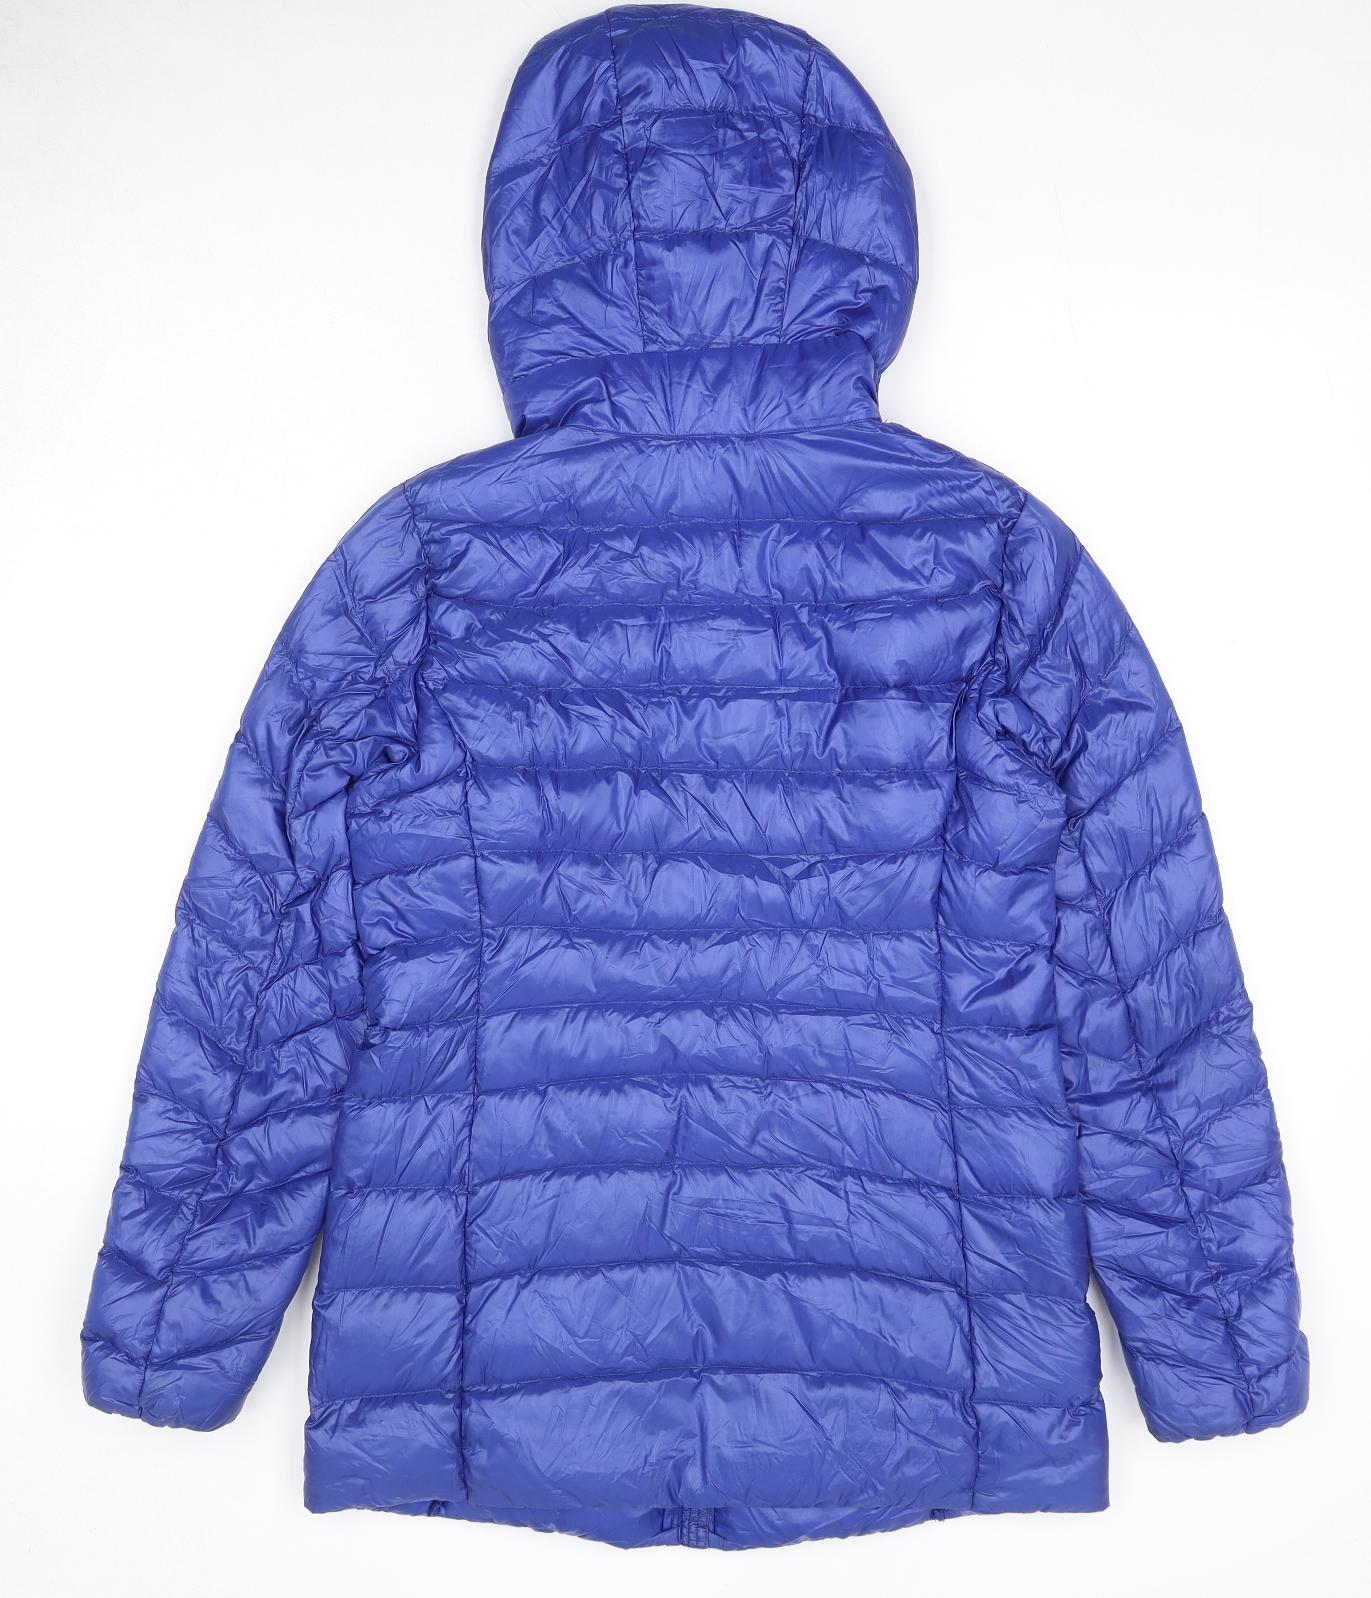 Uniqlo Mens Blue Quilted Jacket Size M Zip